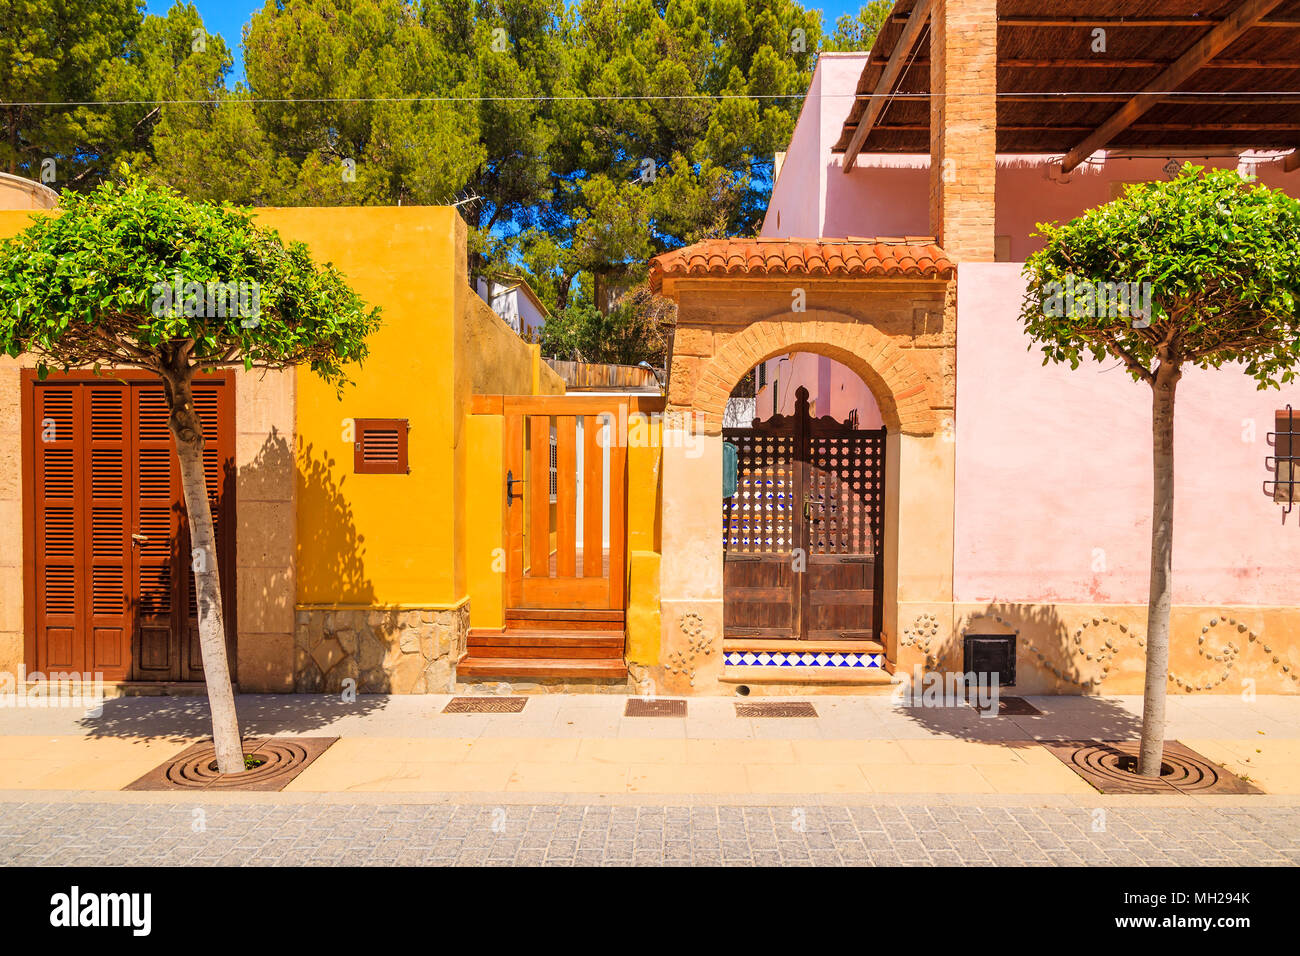 Doorways to typical colorful Spanish houses on street of Sant Elm town, Majorca island, Spain Stock Photo